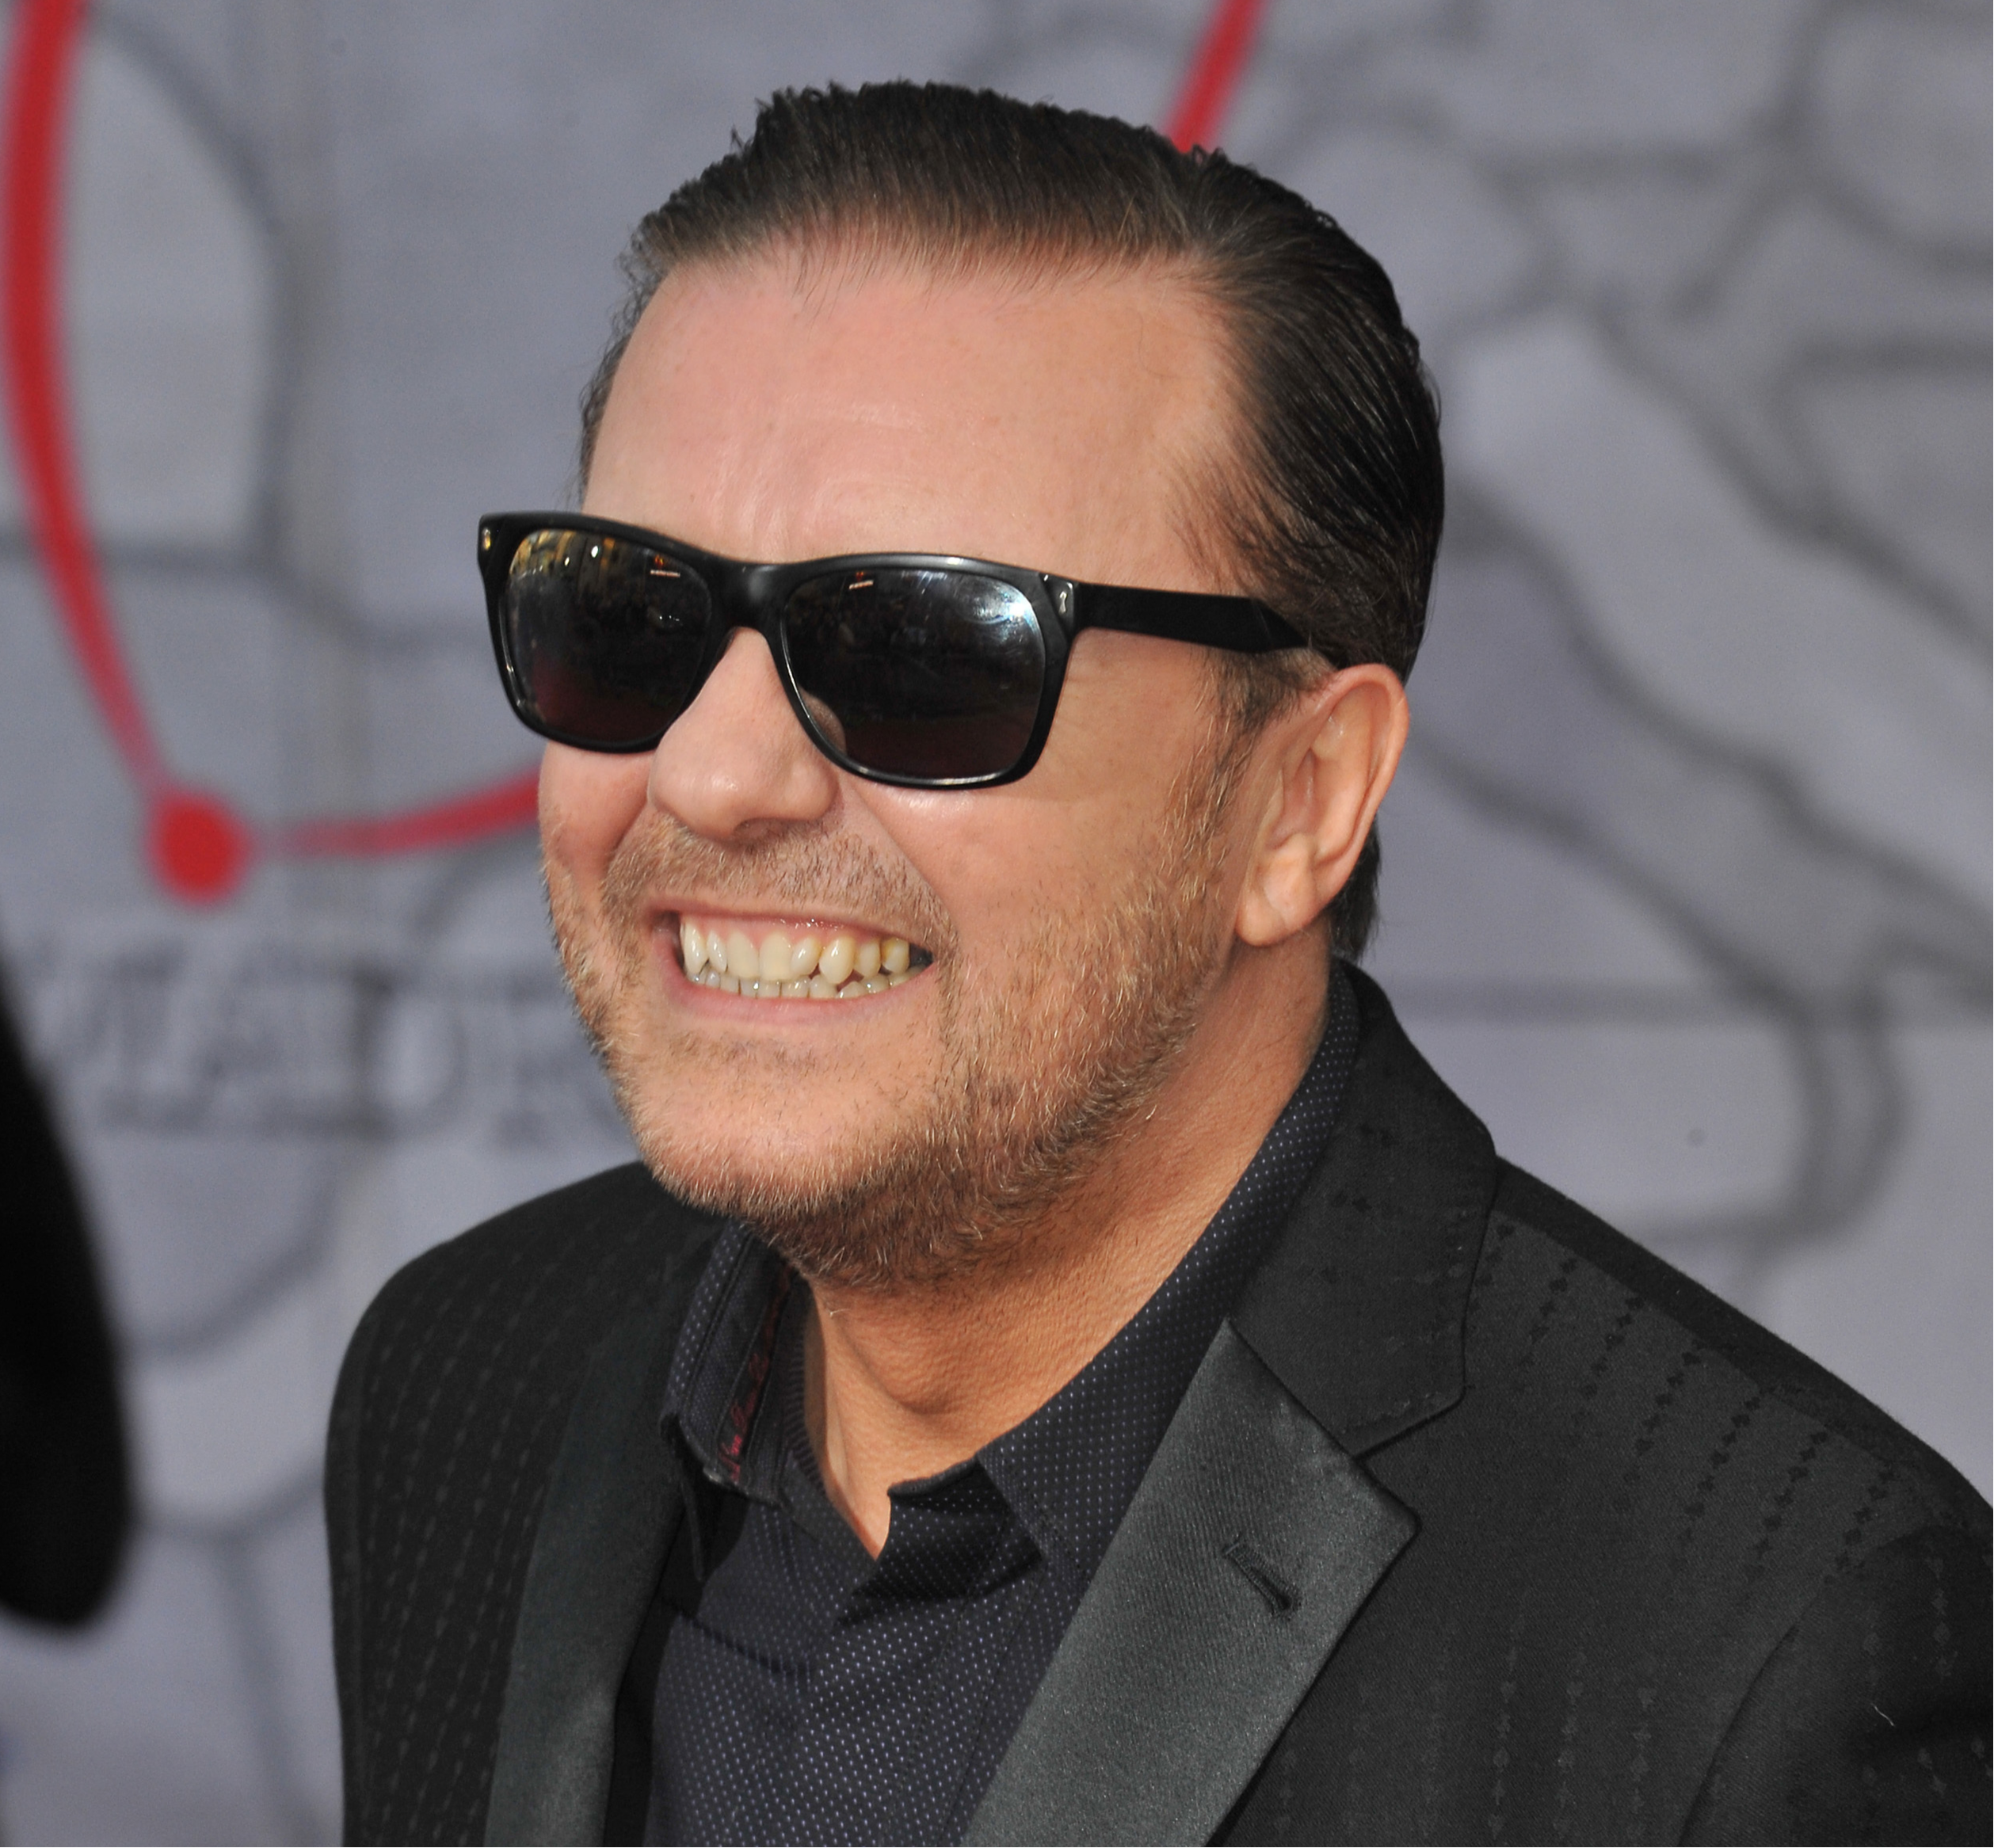 MARCH 11, 2014: Ricky Gervais at the world premiere of his movie Disney's "Muppets Most Wanted" at the El Capitan Theatre, Hollywood.